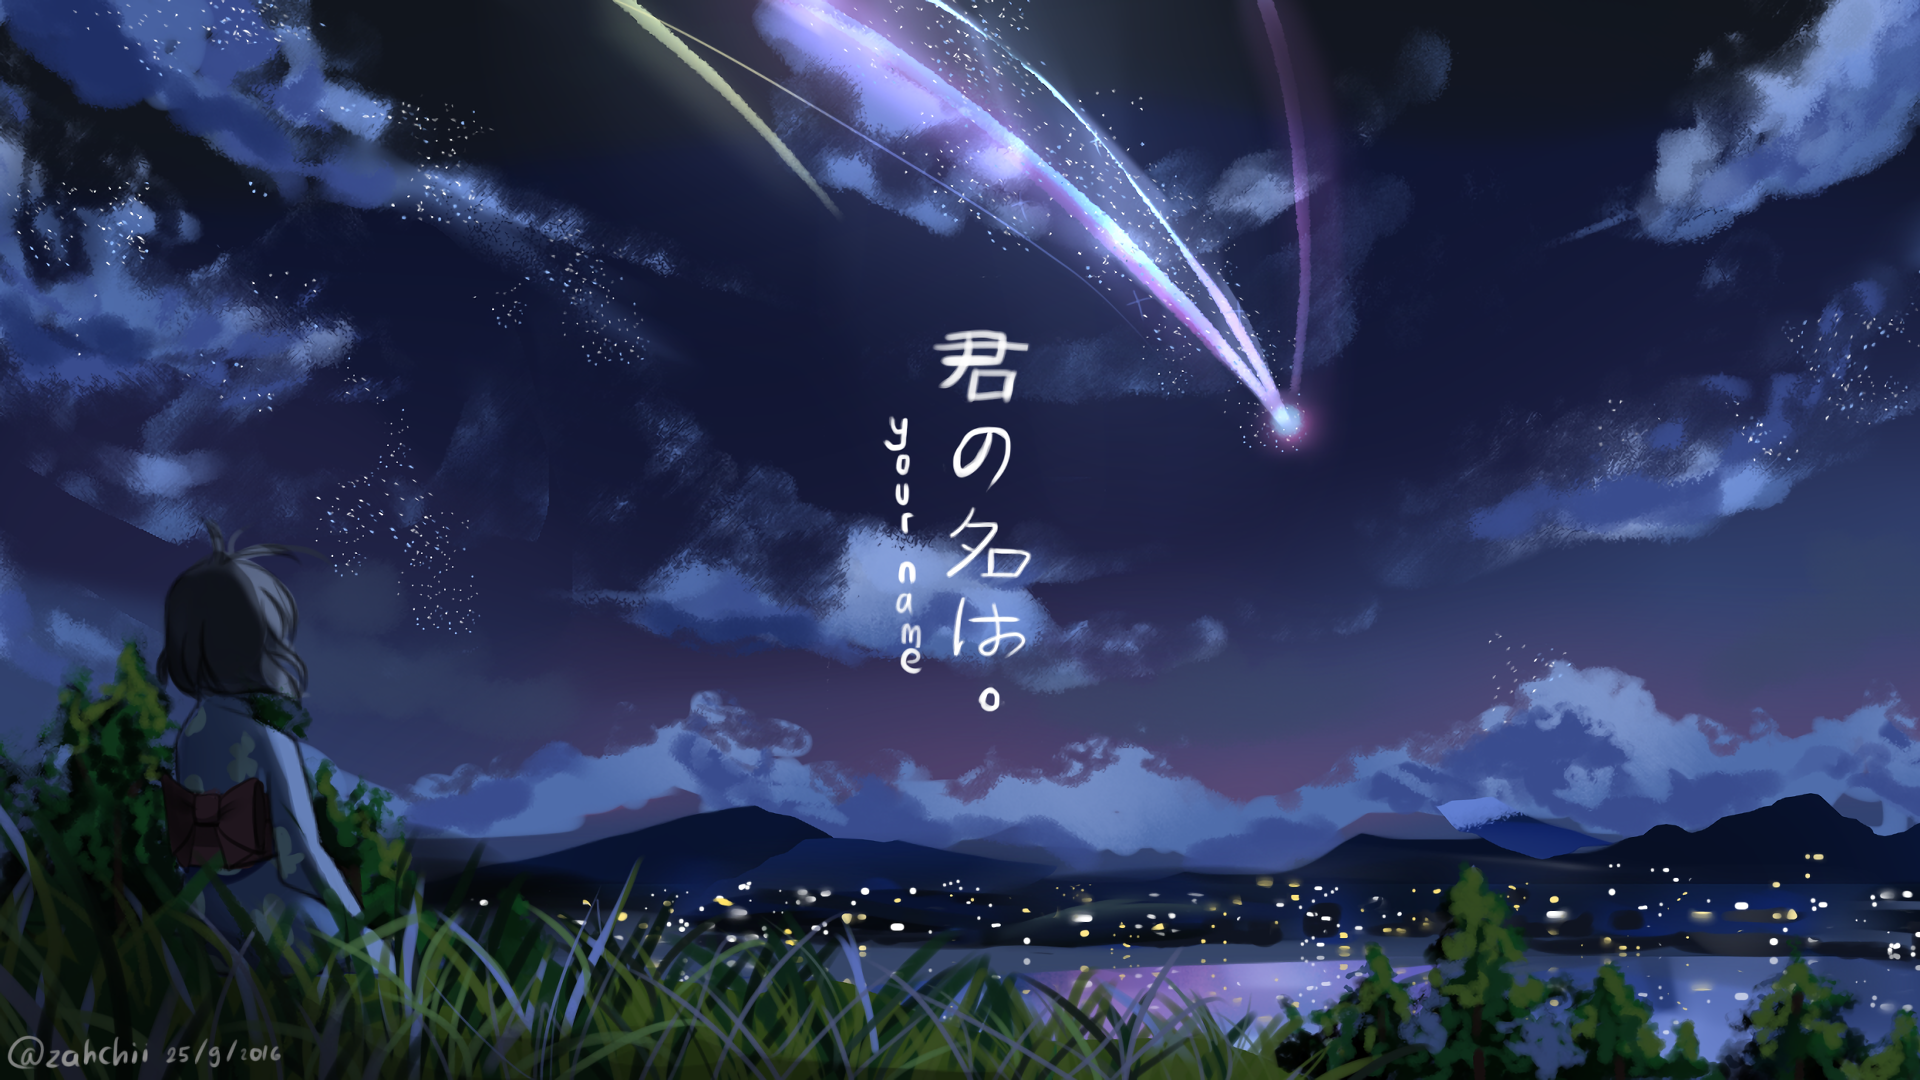 Your Name. HD Wallpaper  Background Image  1920x1080  ID:751215  Wallpaper Abyss